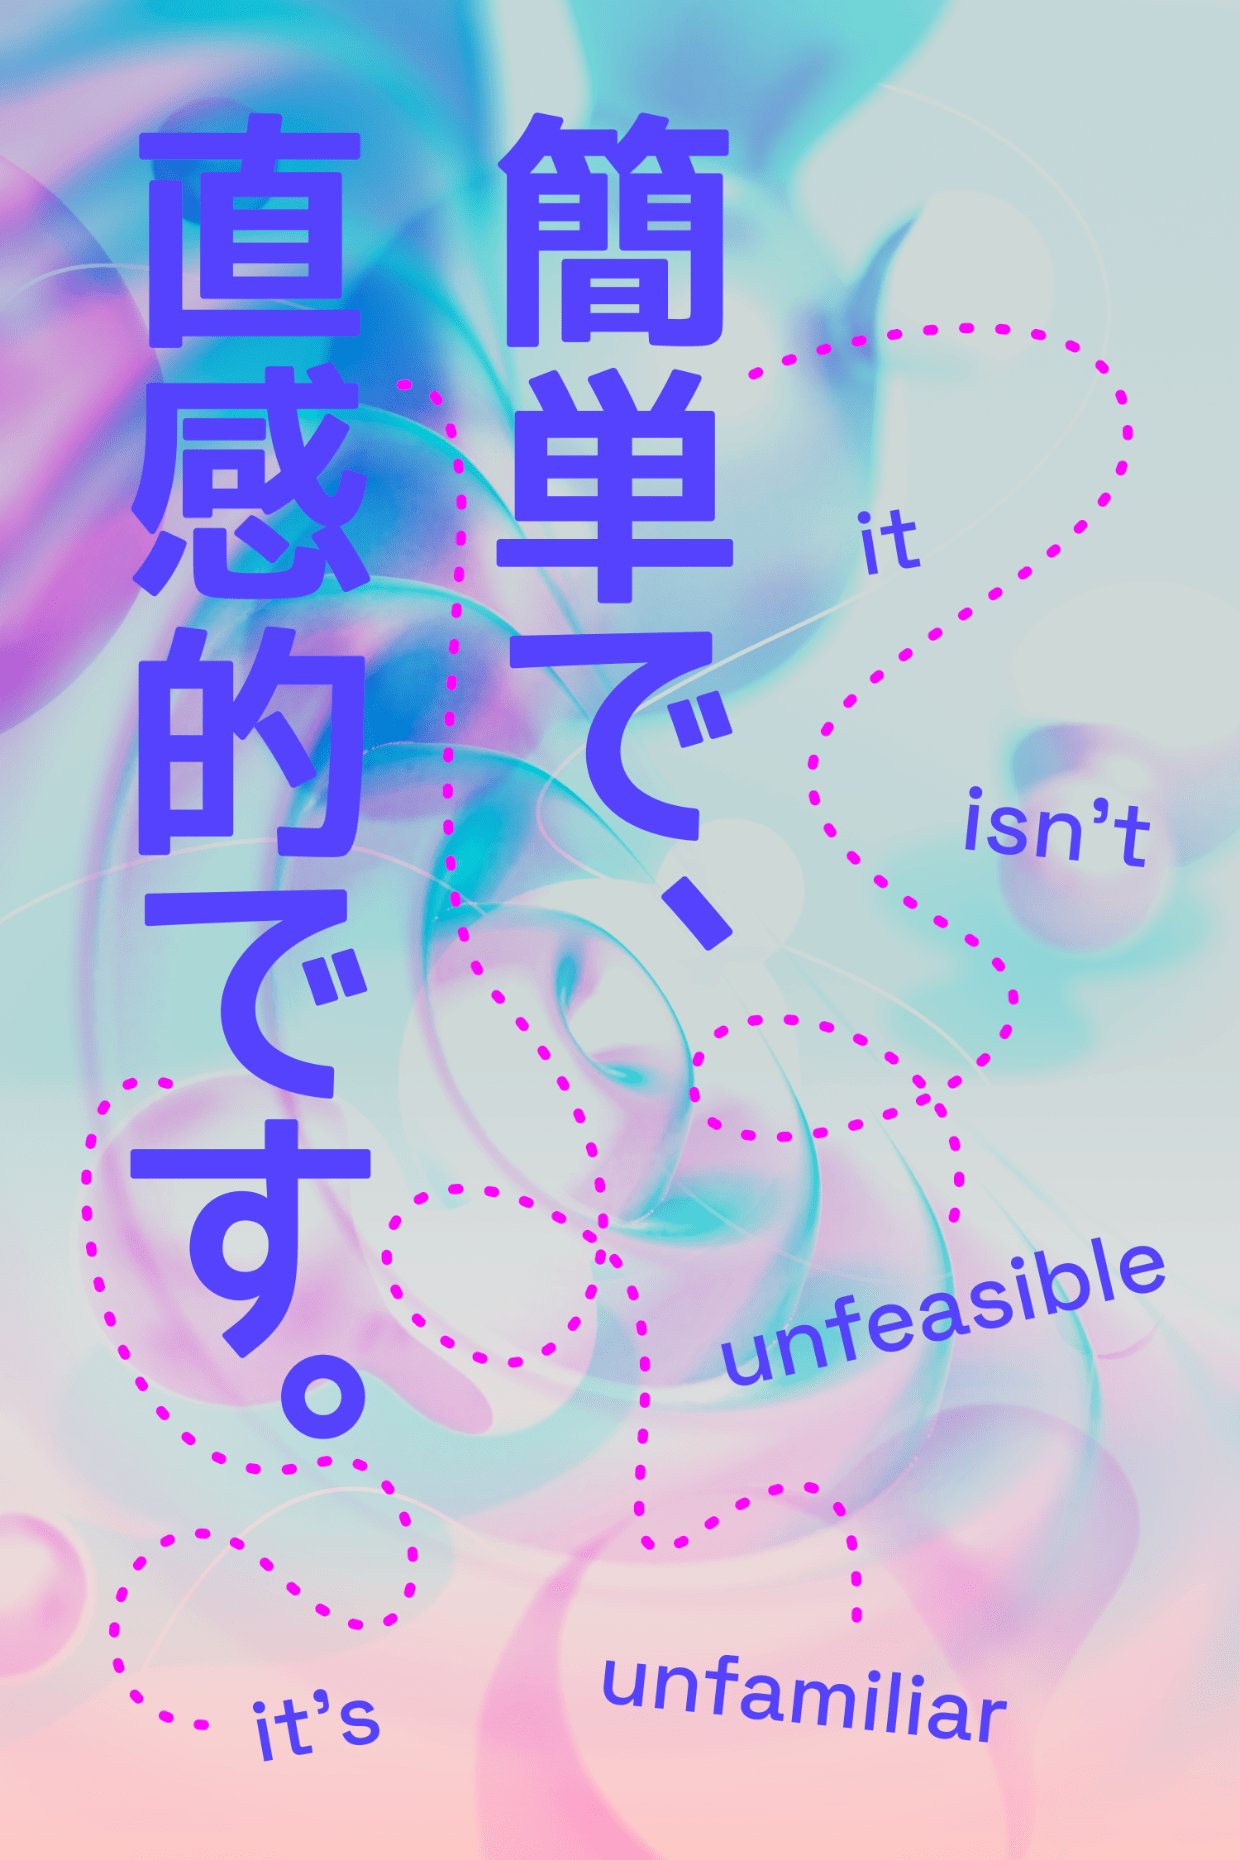 composite poster containing japanese and english text in front of floating blobs